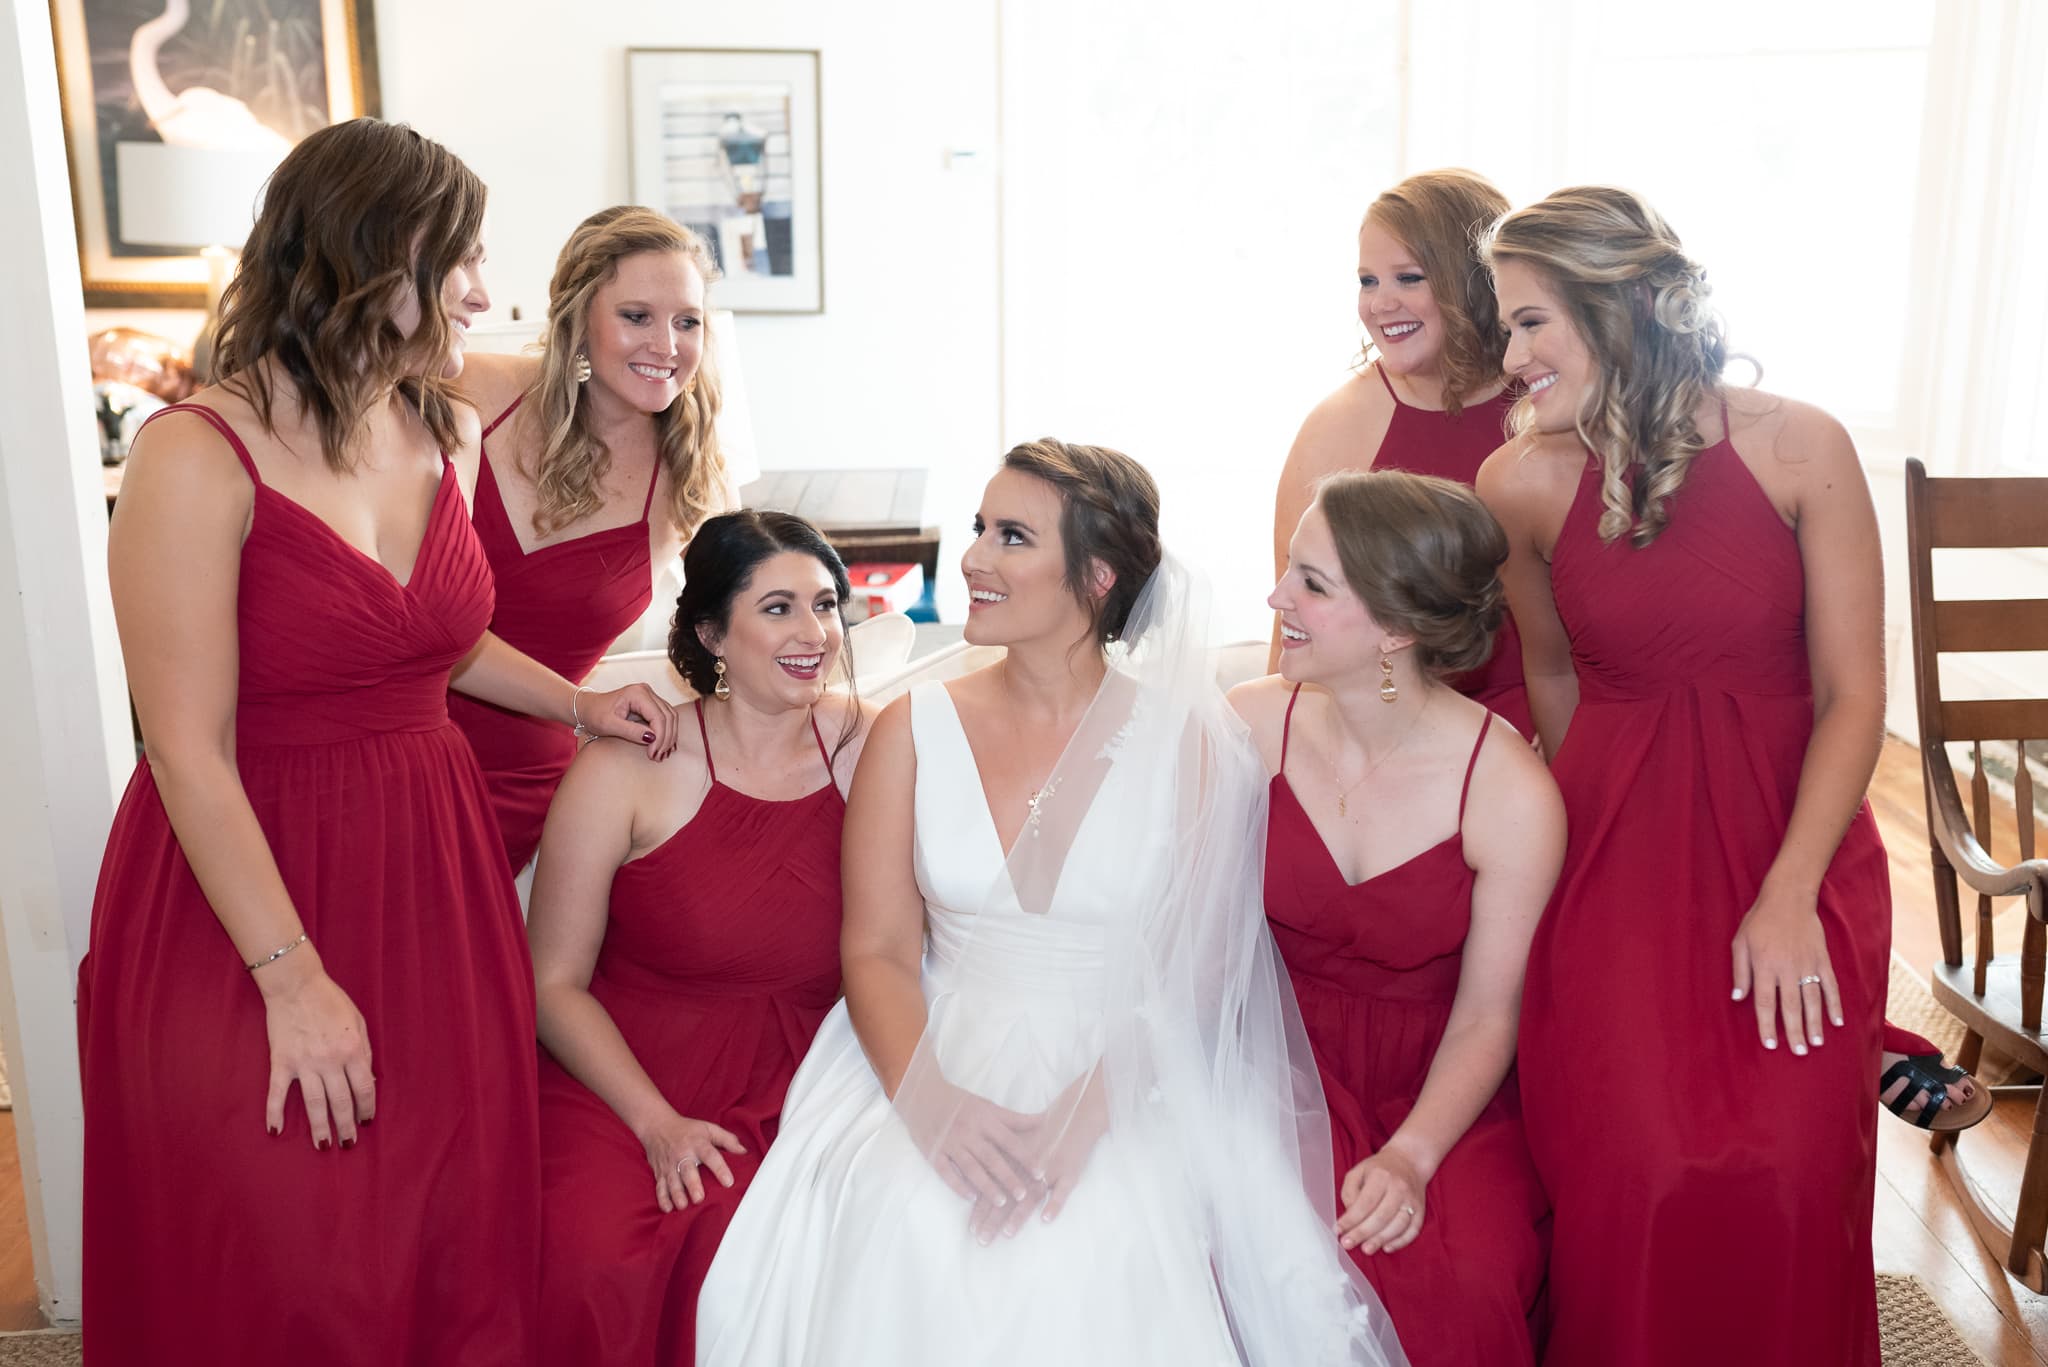 Bridesmaids laughing together before the ceremony  - Pelican Inn - Pawleys Island